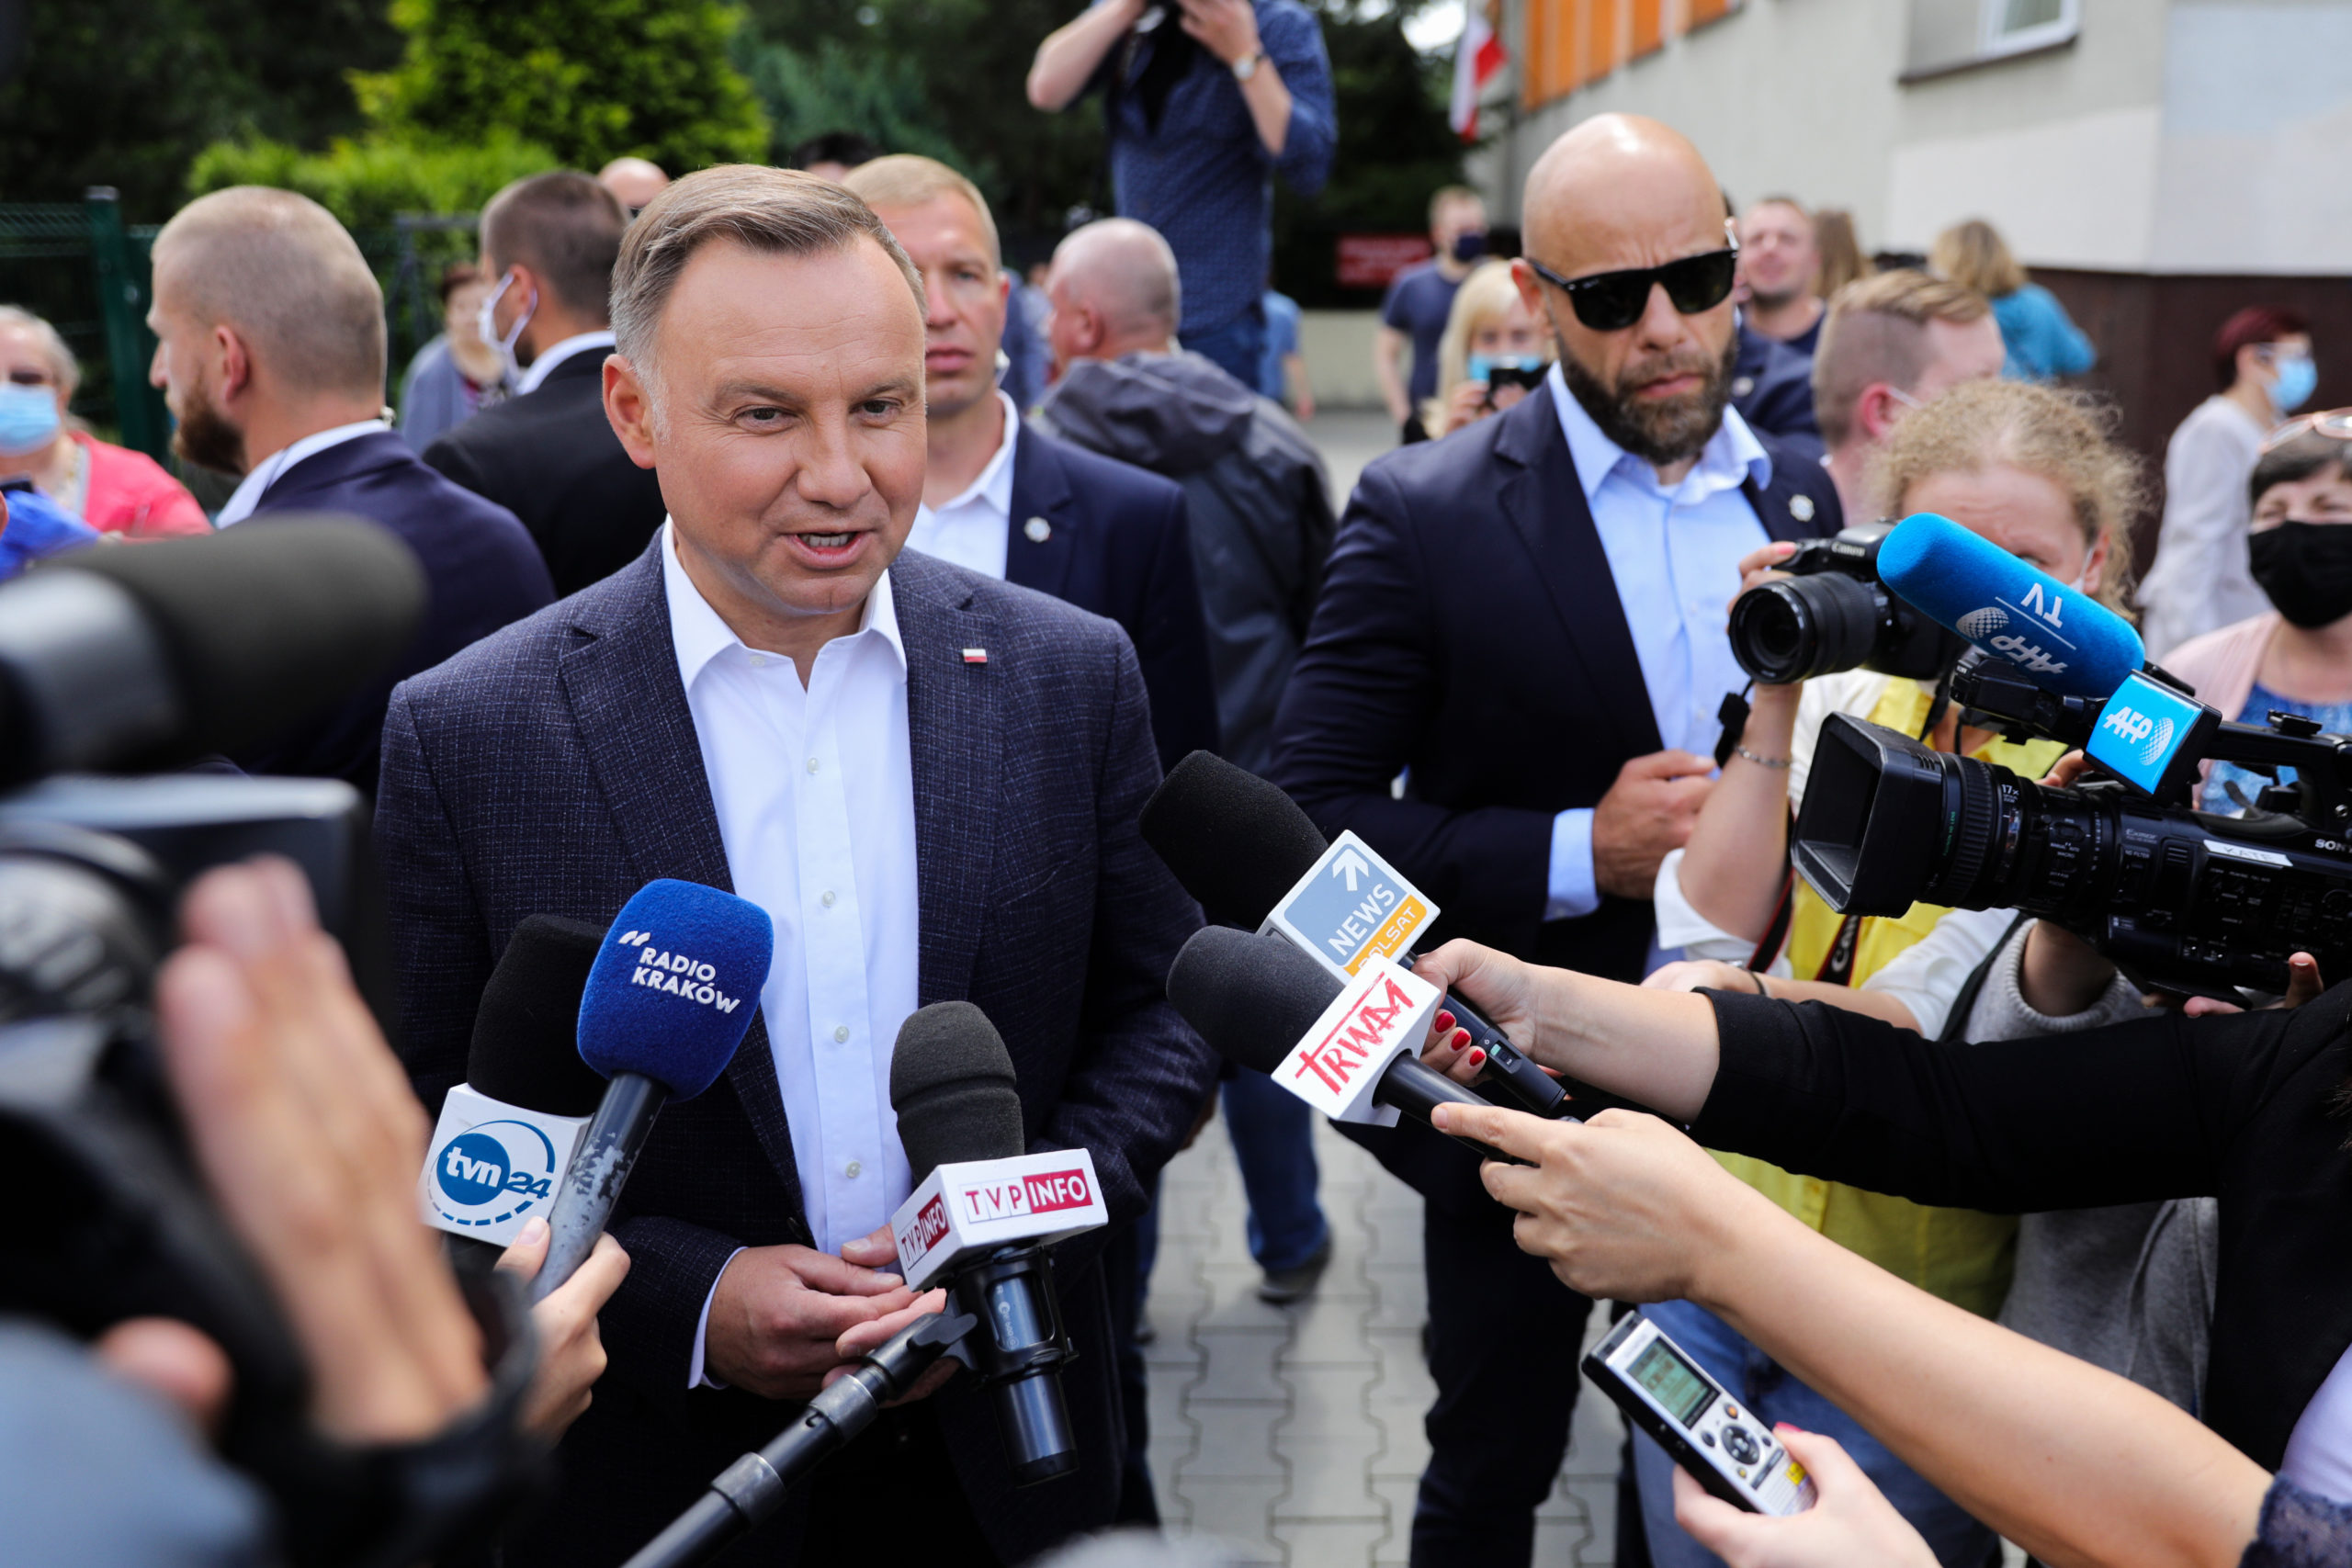 Andrzej Duda Poland S President Wins Re Election After Campaign Of Hatred